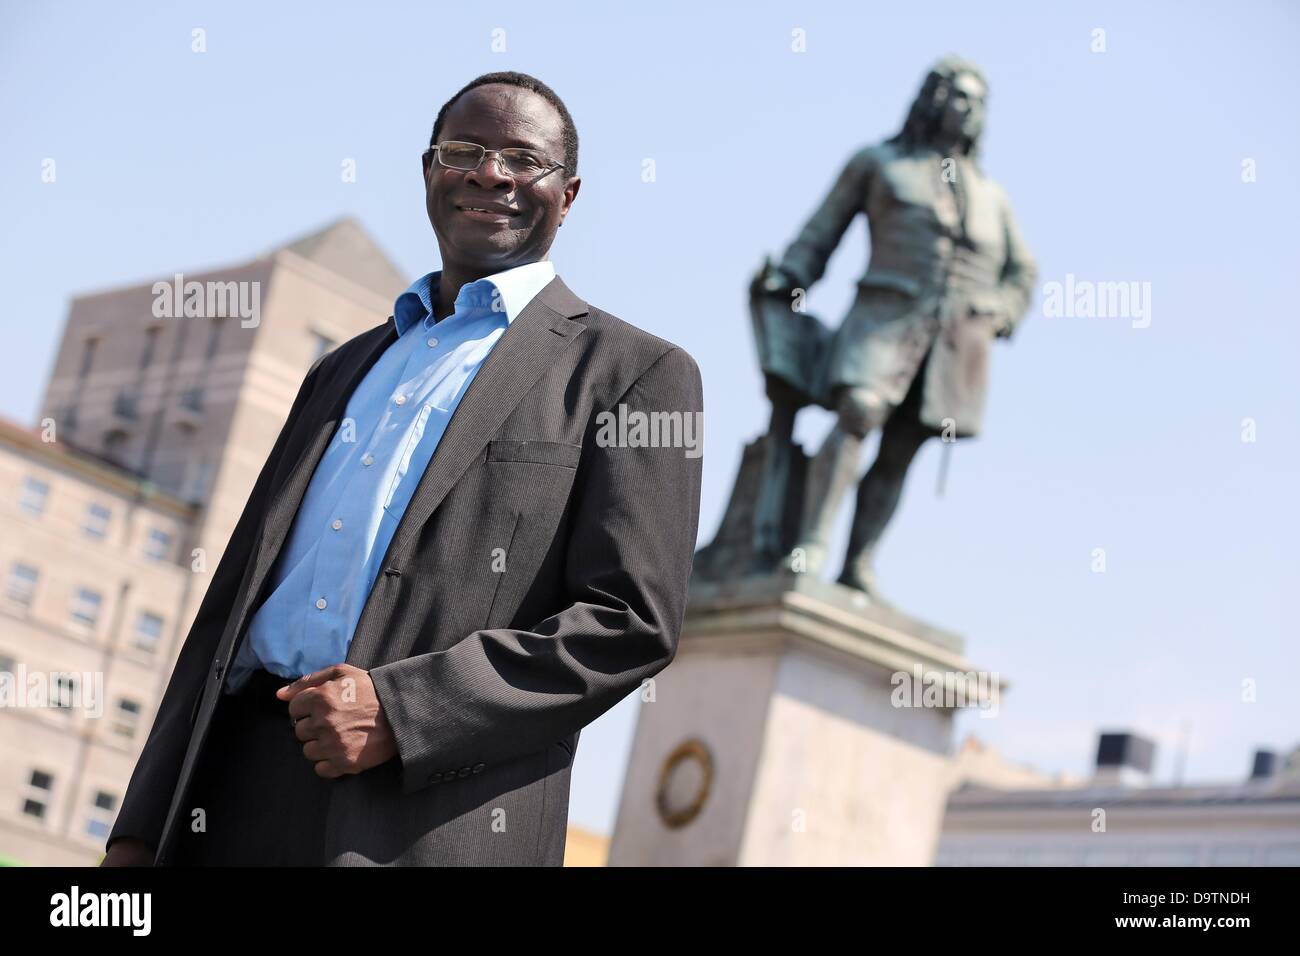 Senegalese-born candidate of the SPD, Karamba Diaby, stands on the market square in Halle/Saale, Germany, 18 June 2013. Diaby is running as a SPD candidate in the forthcoming German federal election for the Bundestag, to be held on 22 September 2013, representing the 72nd constituency in Saxony-Anhalt. Diaby would be the first African-born politician to become member of the Bundestag, the SPD stated. Born in Senegal, Diaby has been a German citizen for 12 years. He joined the SPD in 2008 and has been a member on Halle's city council since 2009. Photo: Jan Woitas/dpa Stock Photo